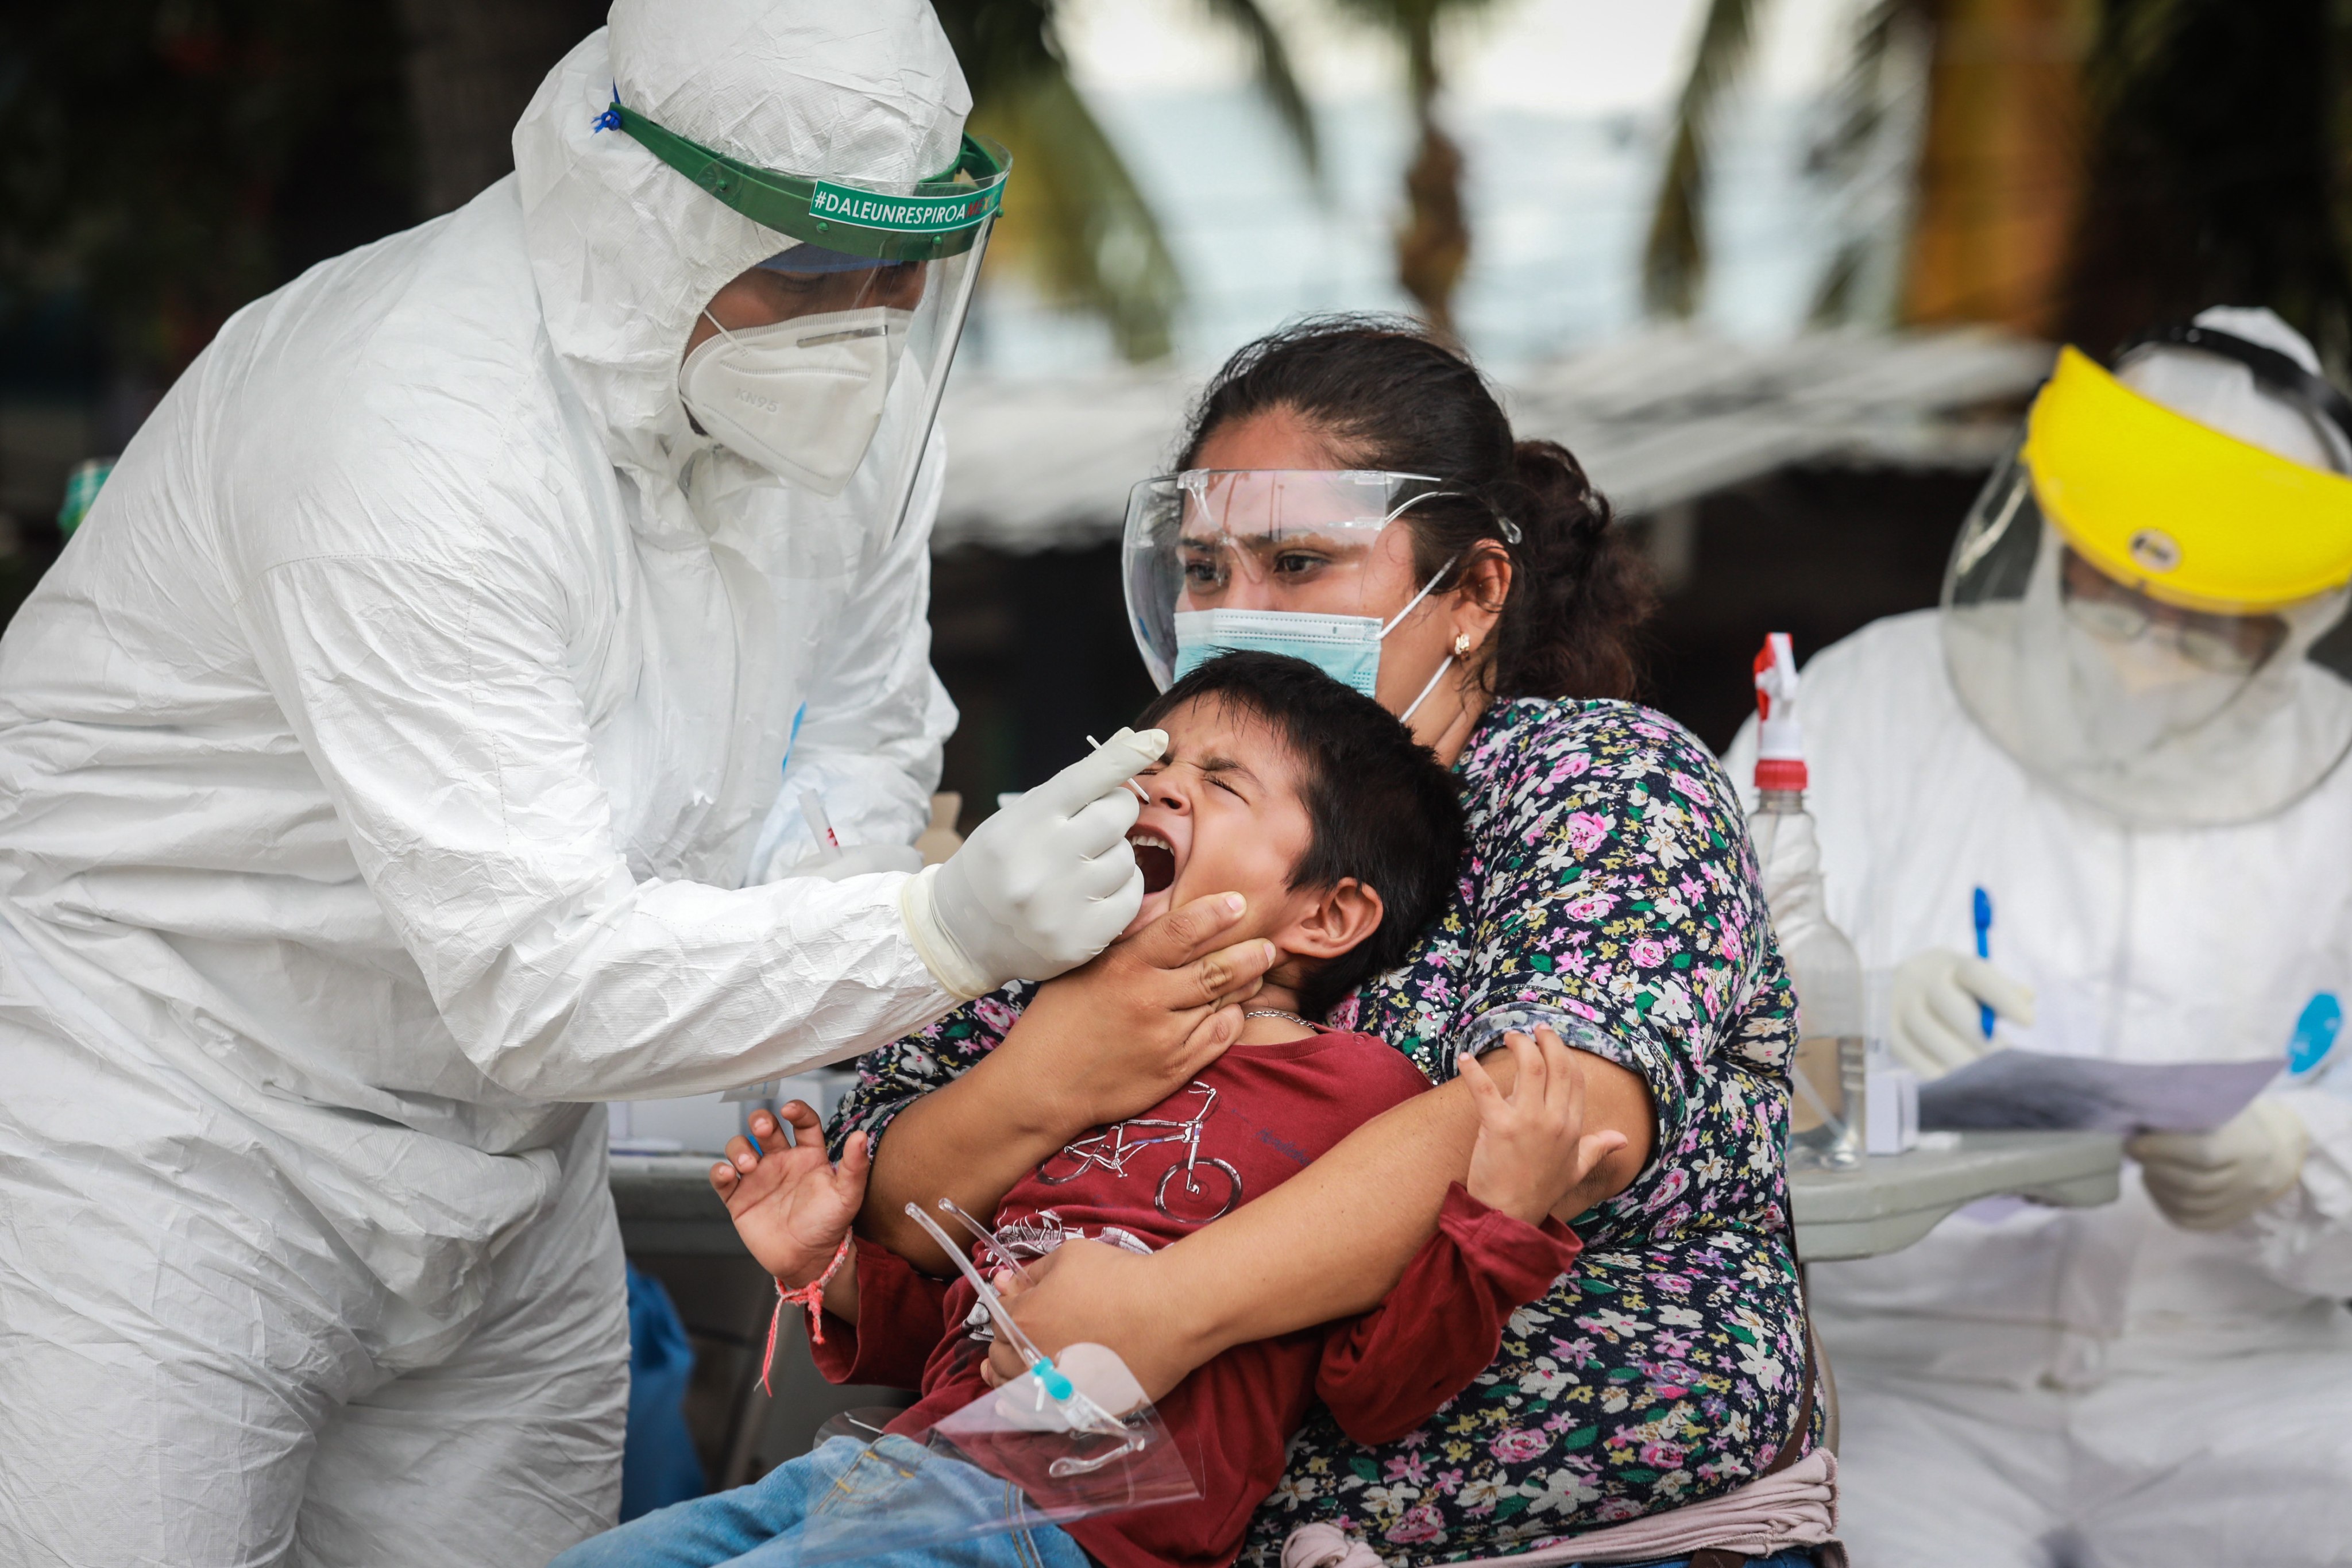 A health worker performs a Covid-19 test on a minor, in Acapulco, Mexico, on July 29.  The WHO is calling for at least 10 per cent of the population of every country to be vaccinated by September. Photo: EPA-EFE